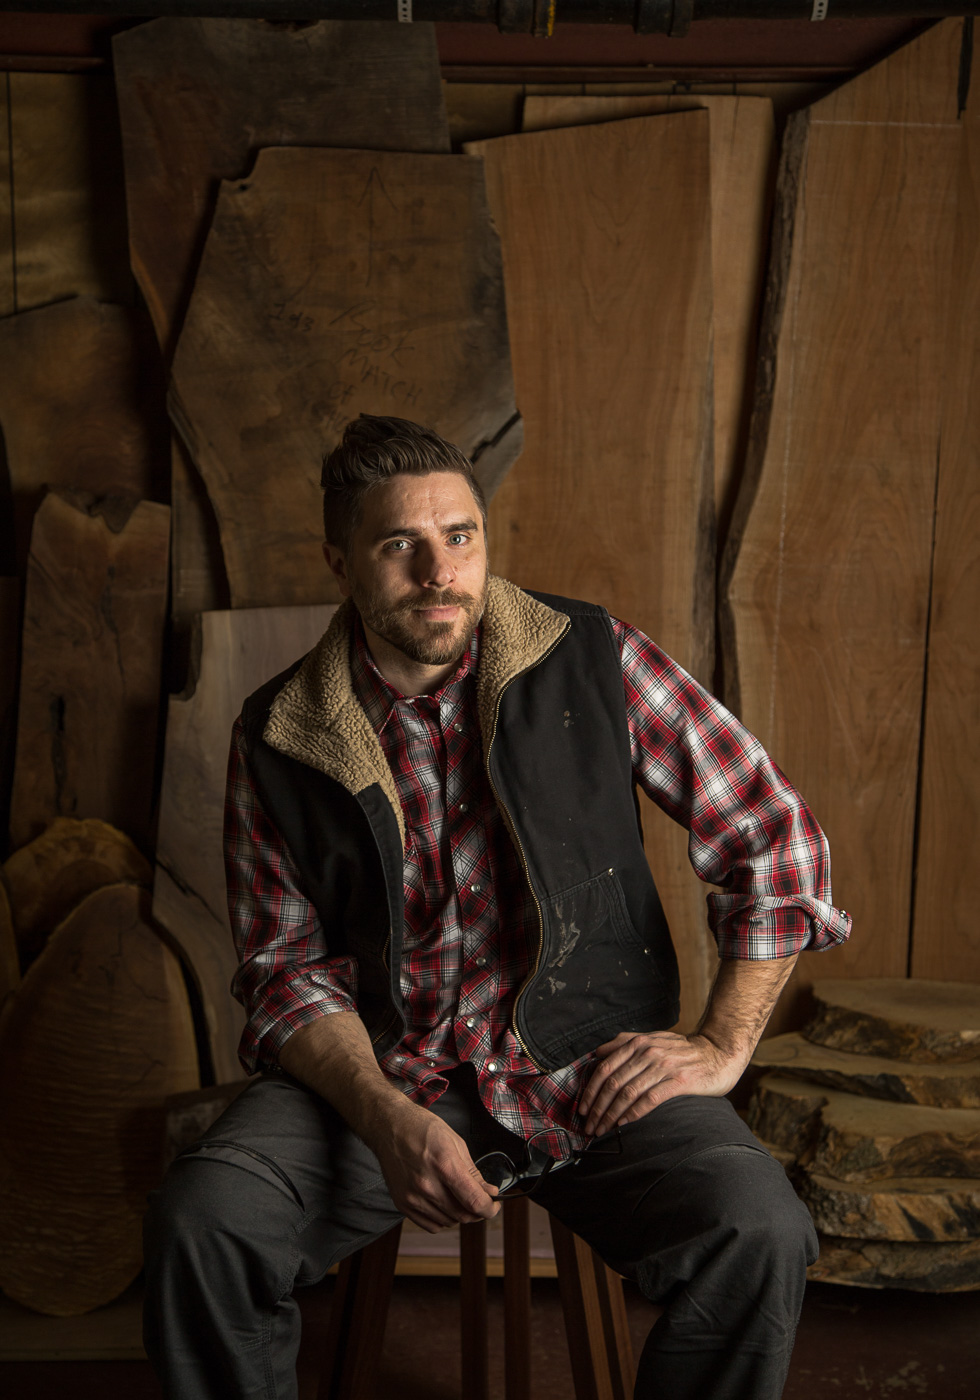 Joseph Lamacchia, designer and  craftsman, photographed in his former workshop and childhood home in Kenosha, WI